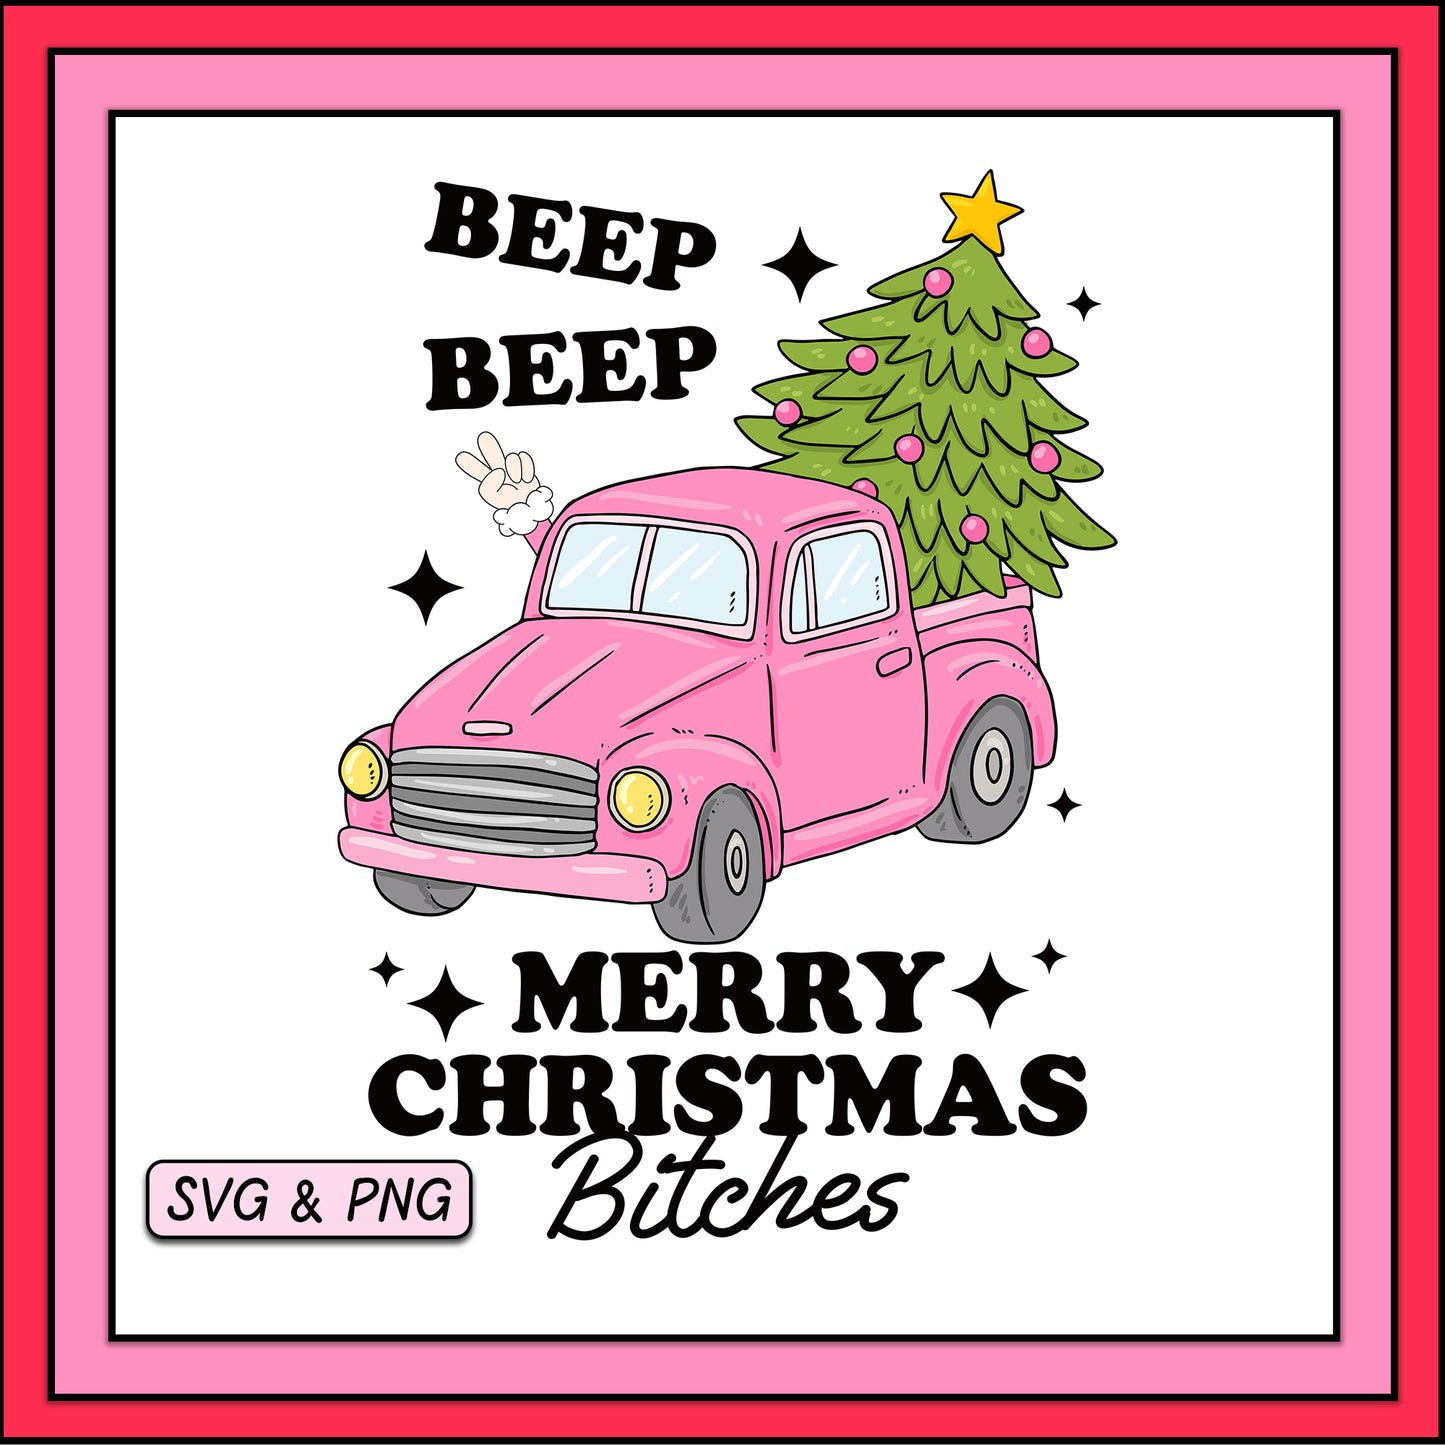 Beep Beep Merry Christmas Bitches - SVG & PNG Design File